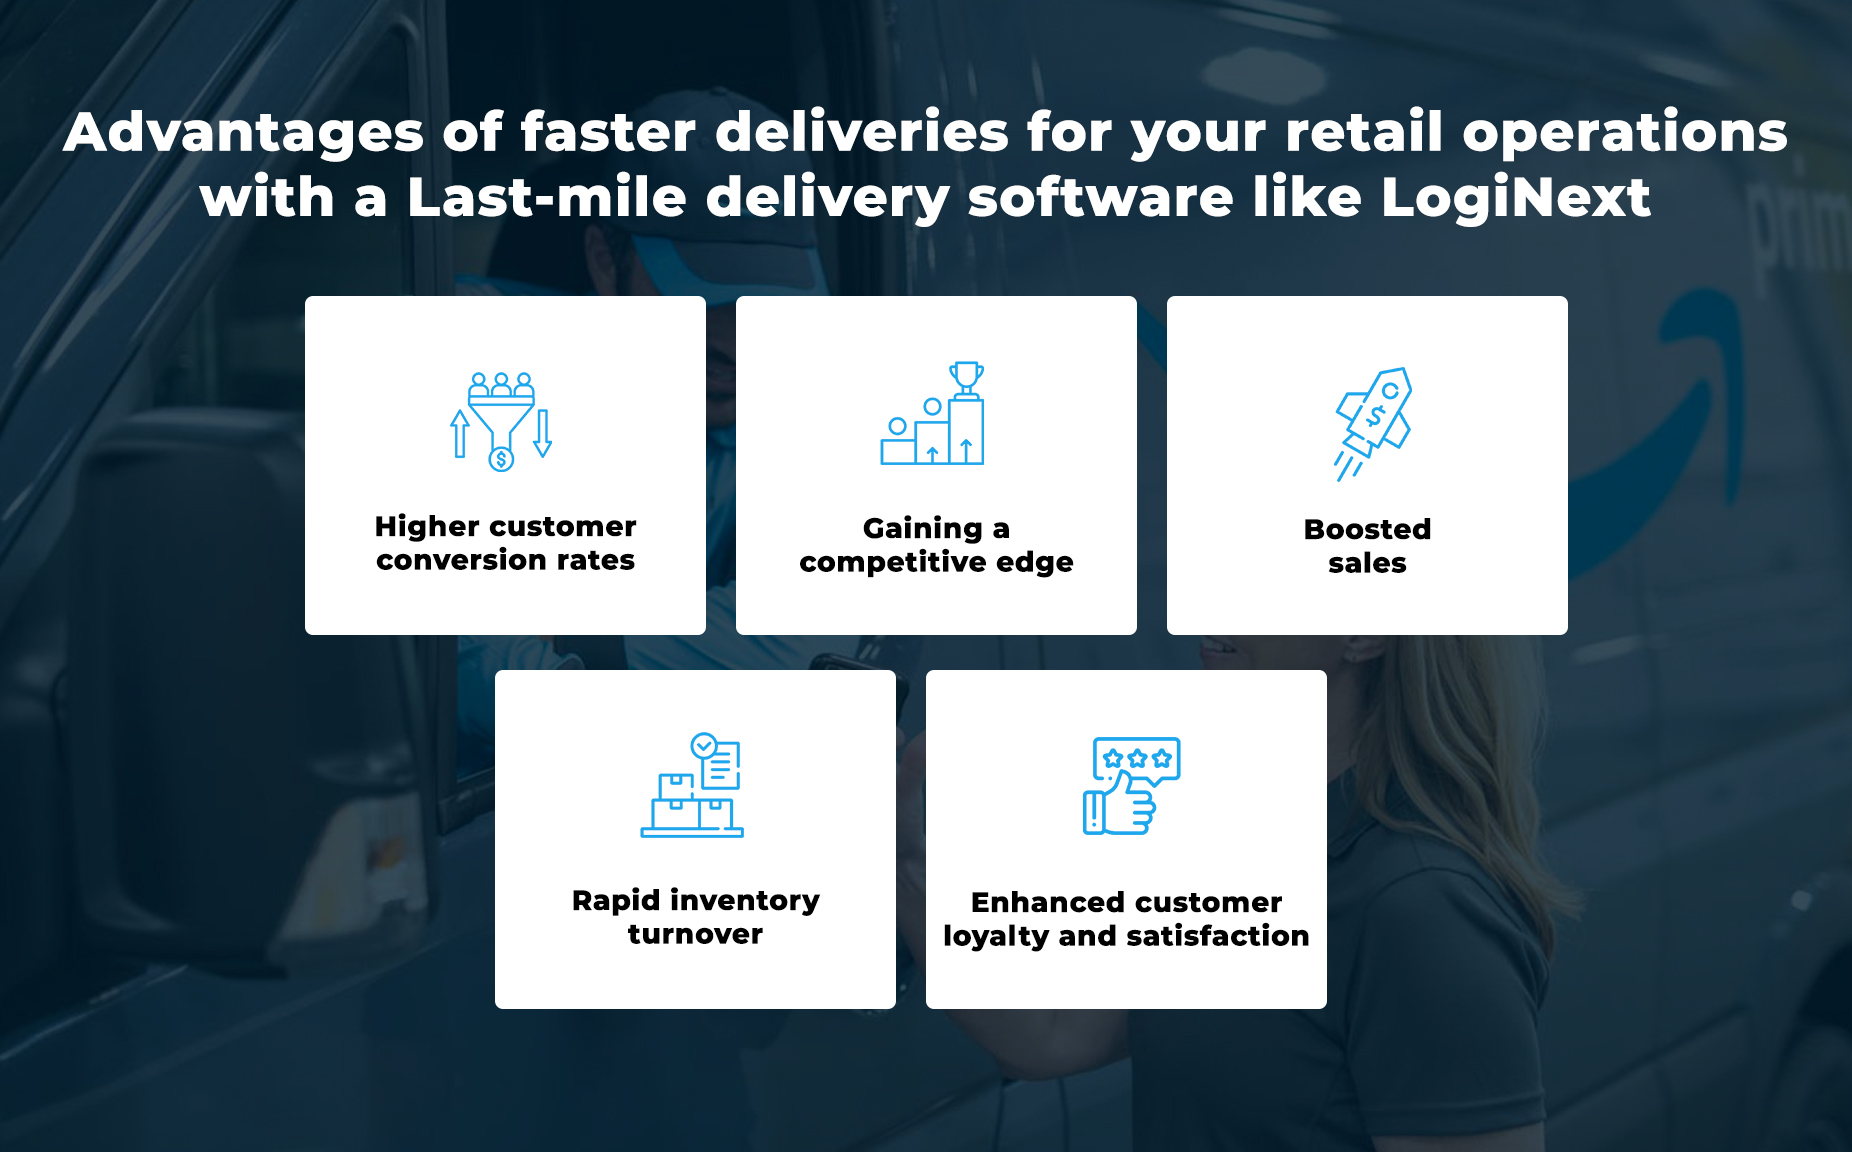 Advantages of last-mile delivery with LogiNext